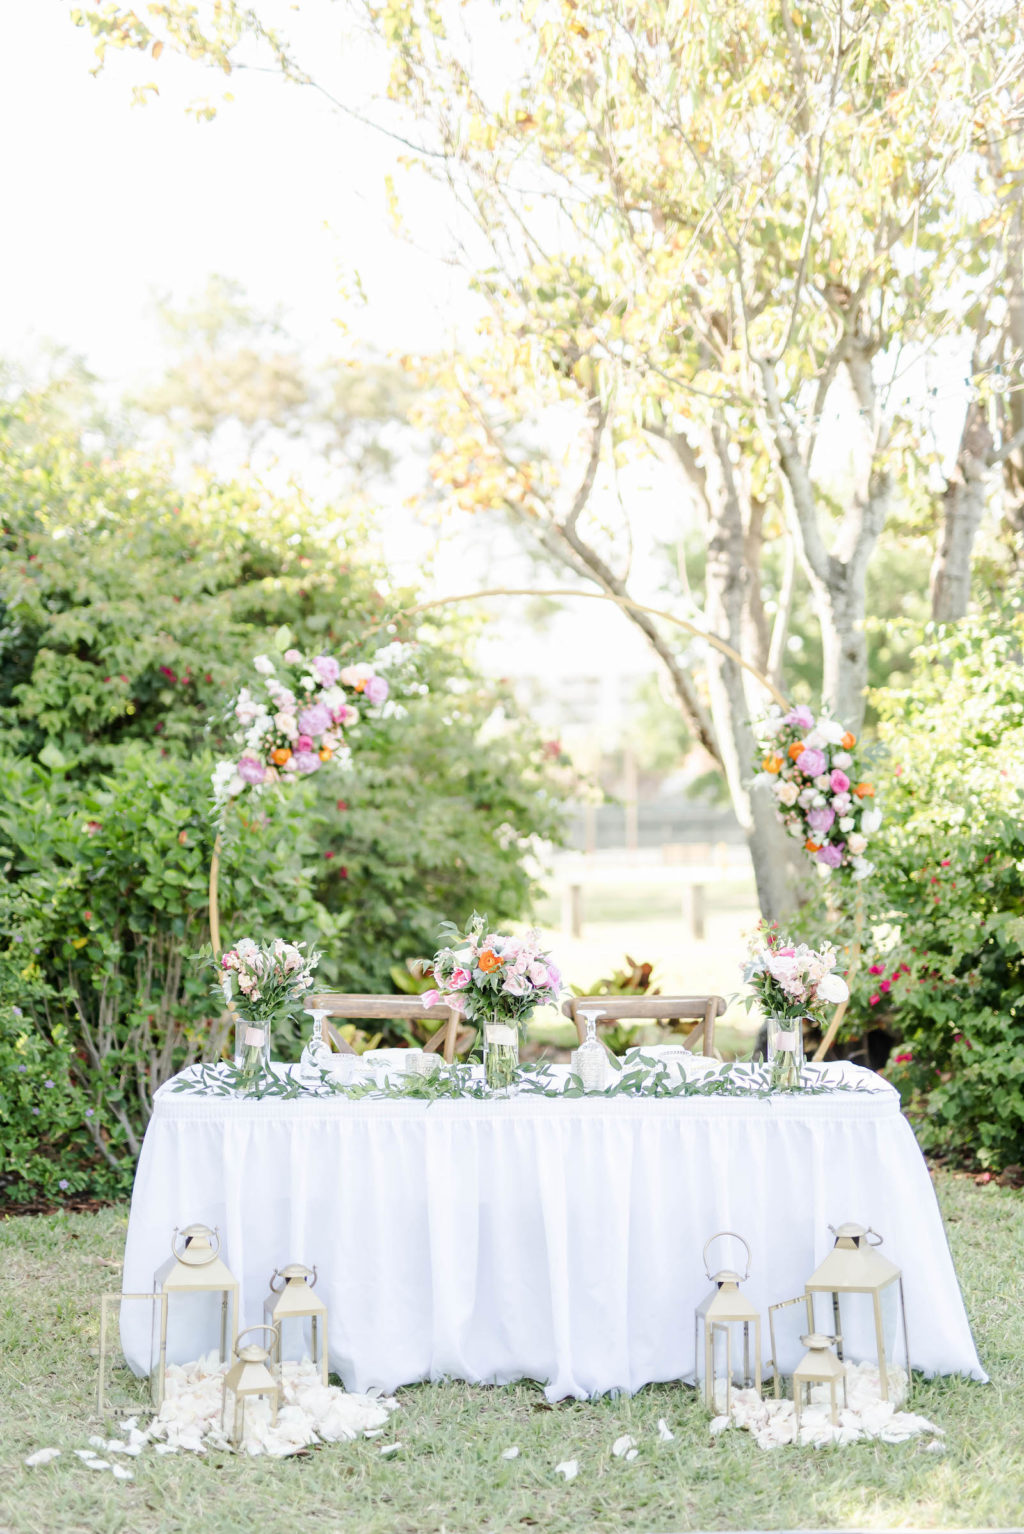 Wedding Sweetheart Table with White Linen | Gold Arch with Pink and White Florals and Laterns | Romantic Garden Wedding Reception Ideas | Tampa Bay Rental Company Outside the Box Event Rentals | Planner Special Moments Event Planning